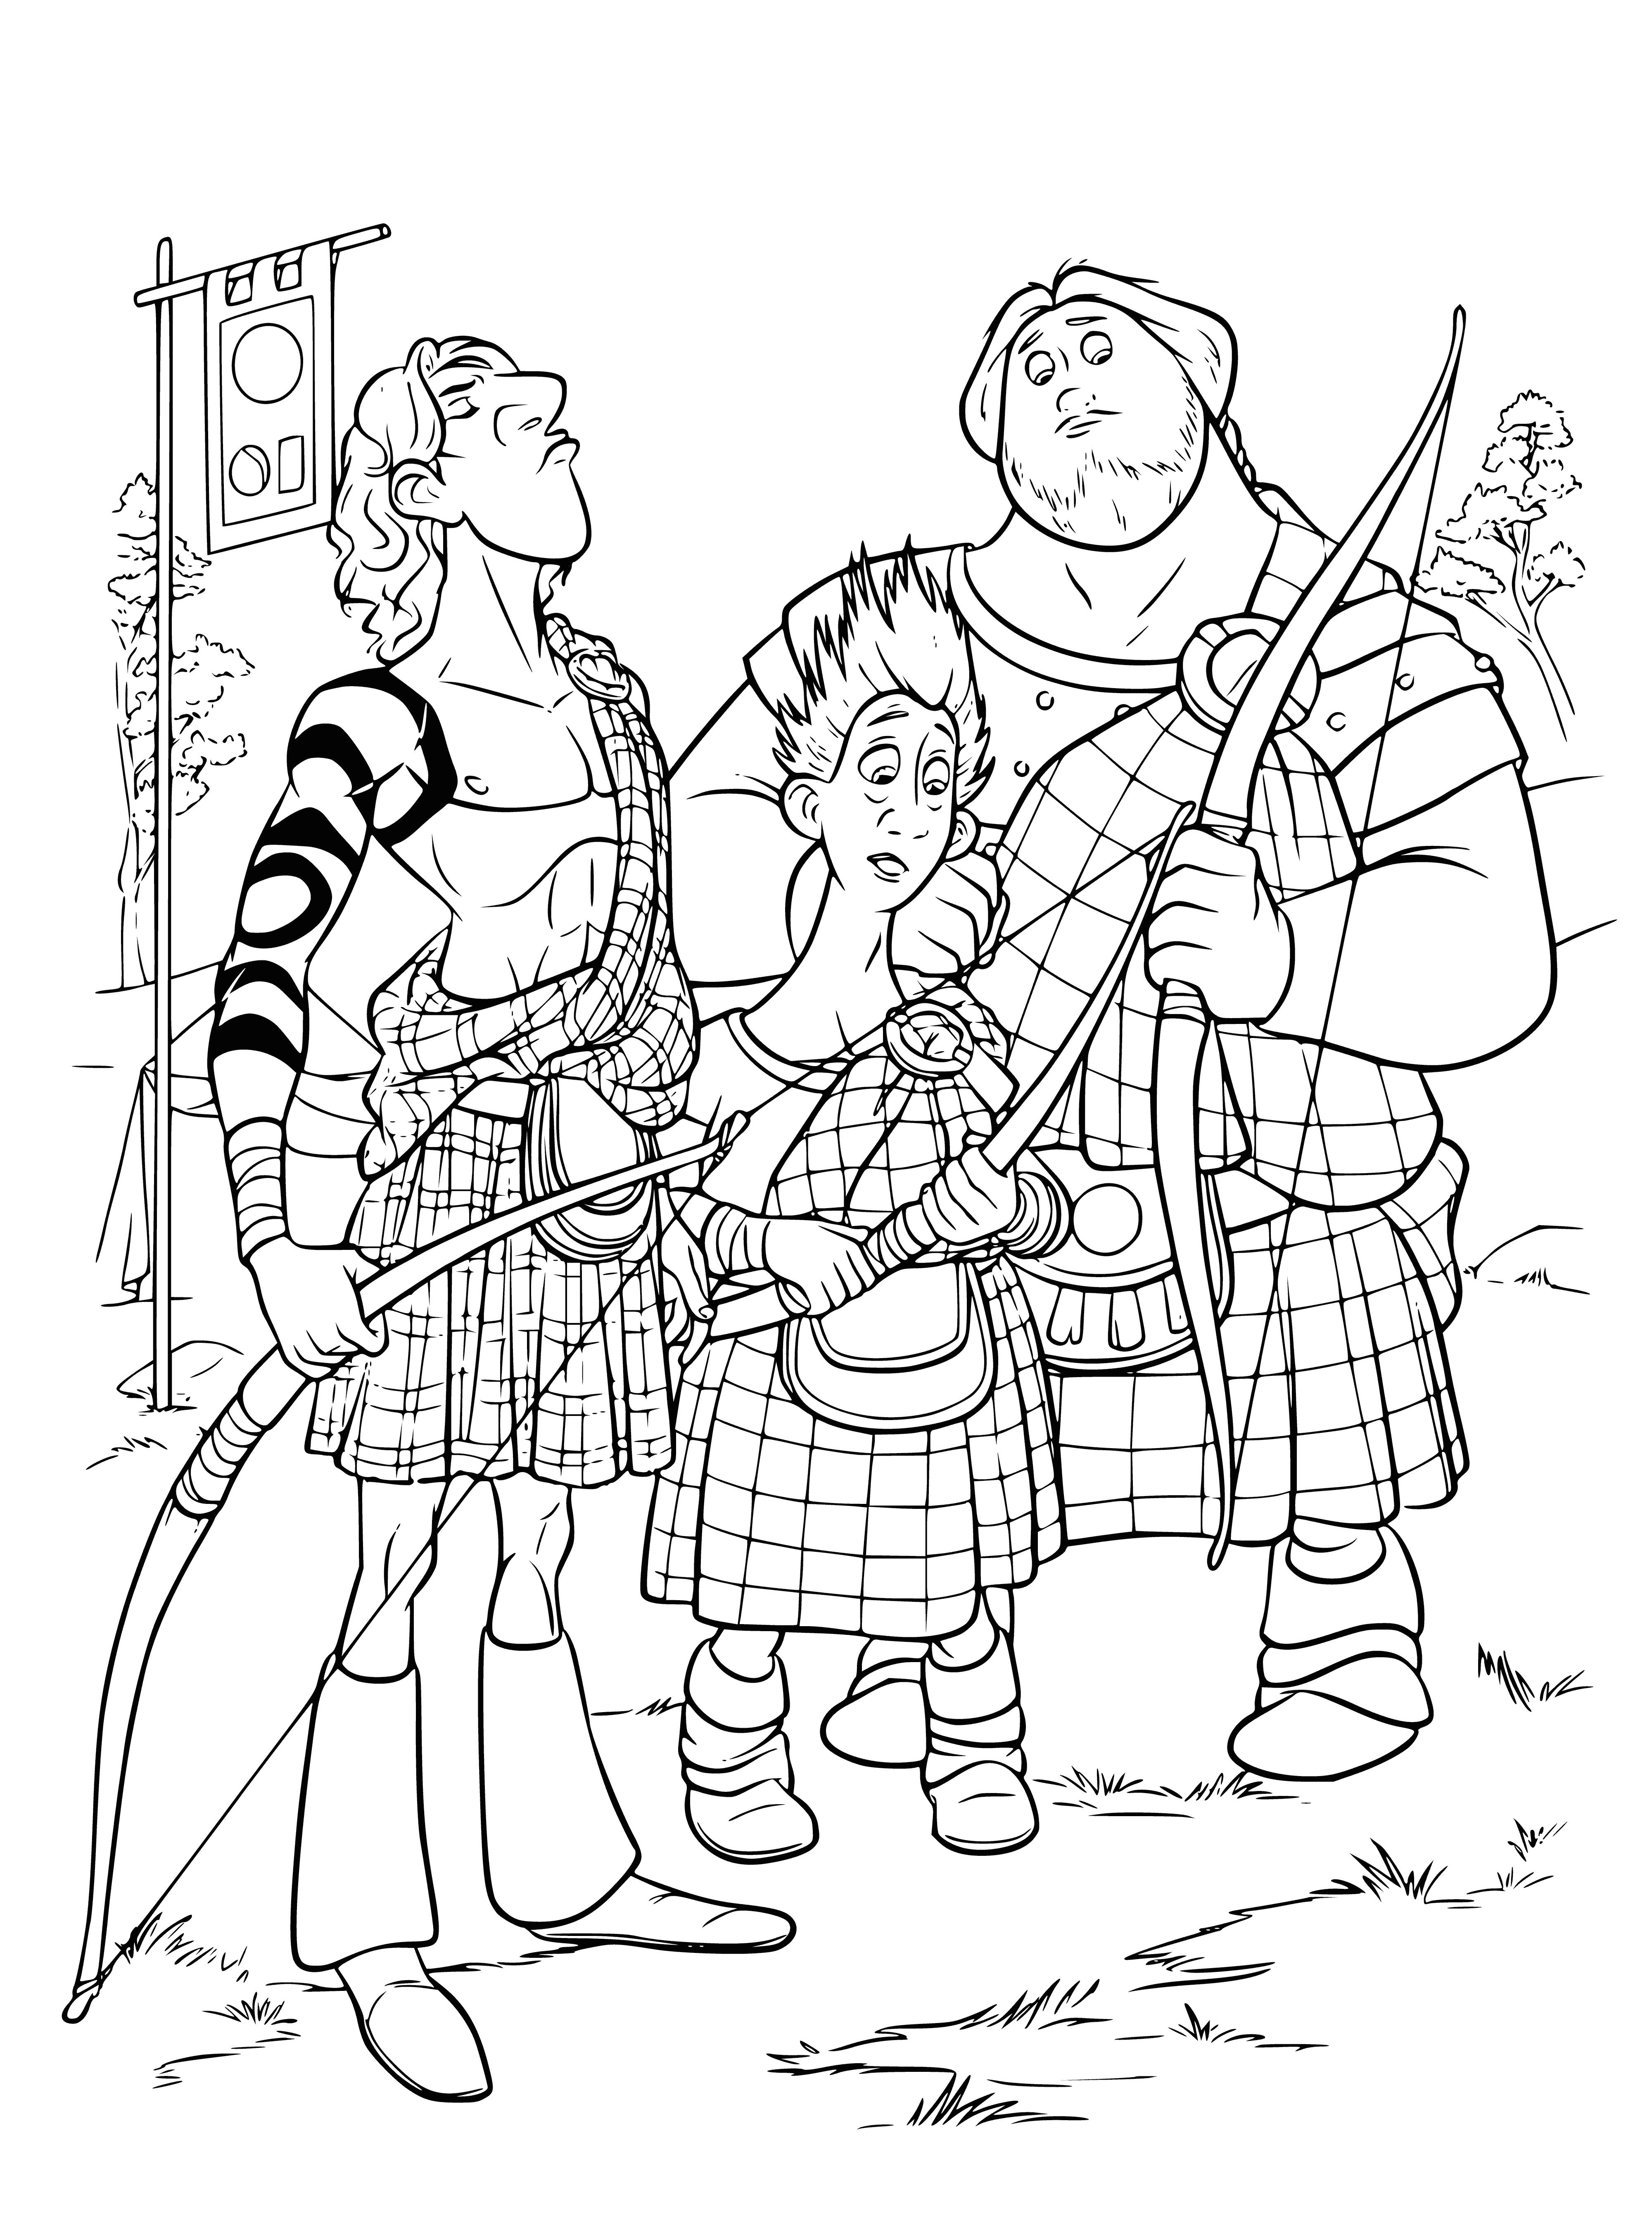 Young Scottish Lords coloring page